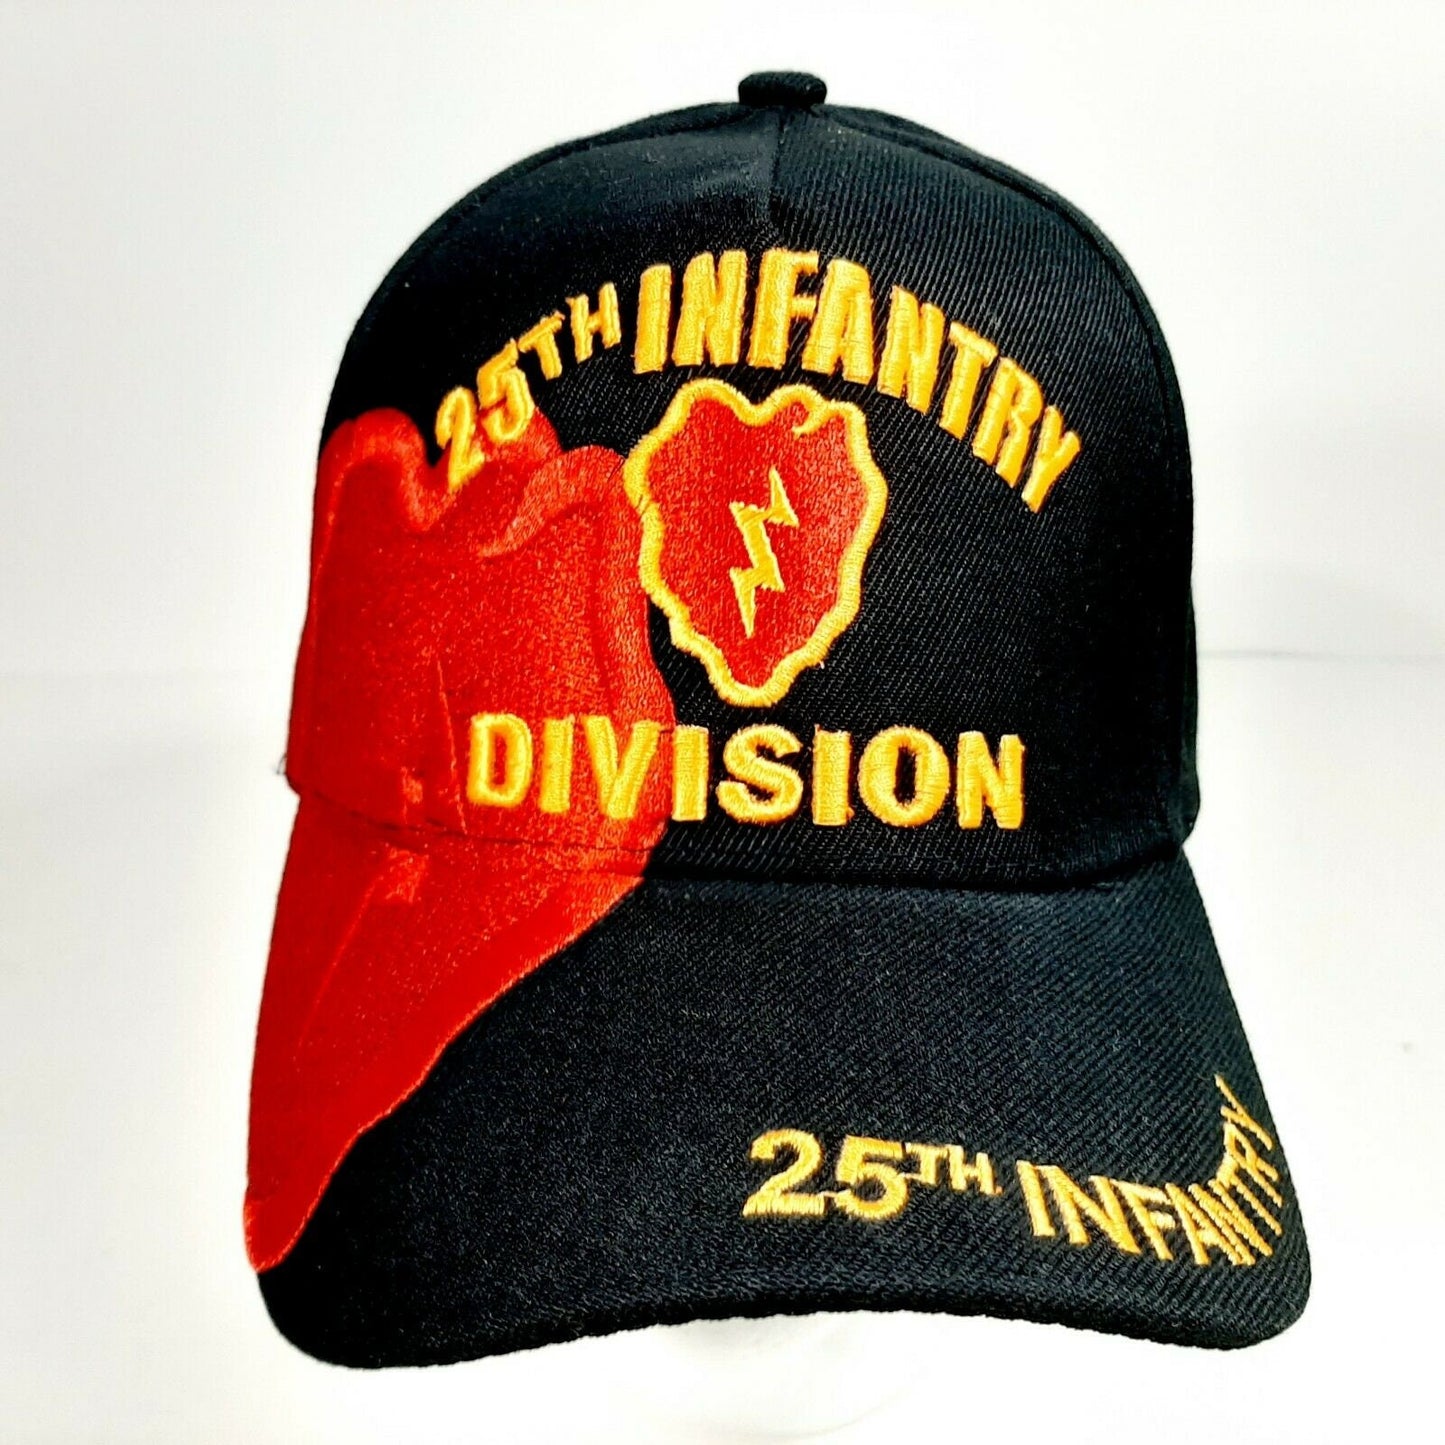 US Army 25th Infantry Division Tropic Lightning Men's Hat Cap Black Embroidered Acrylic